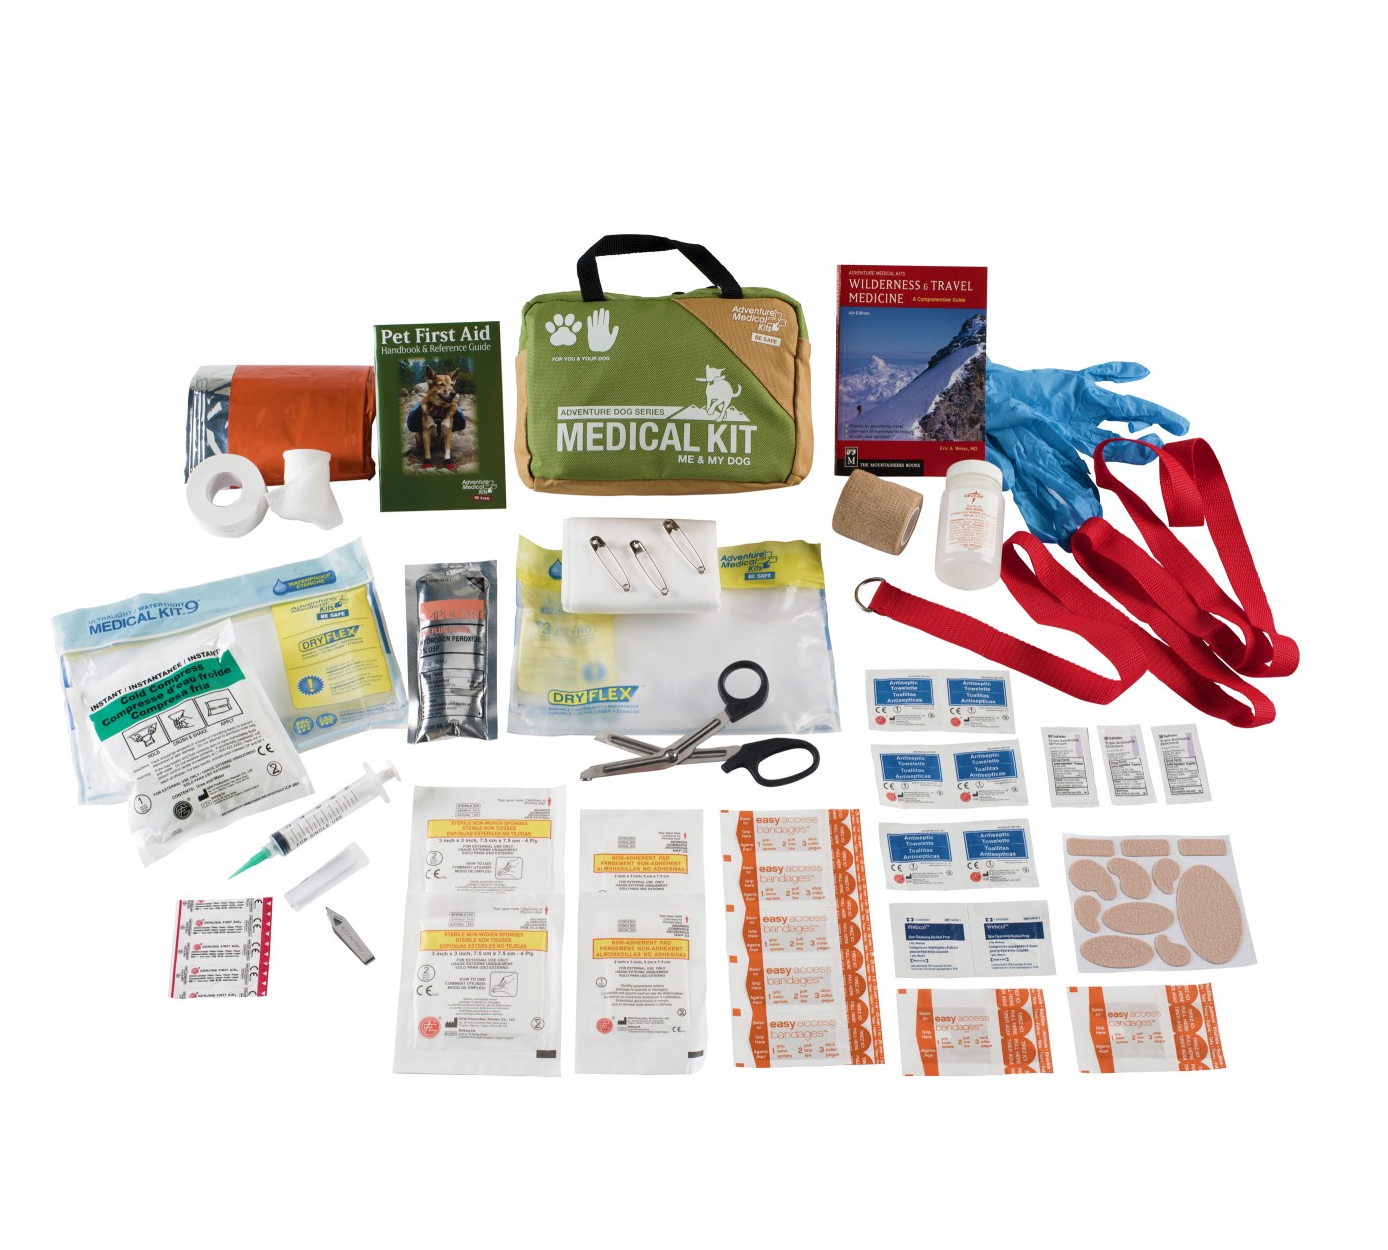 HEALTH AND MEDICAL SUPPLIES